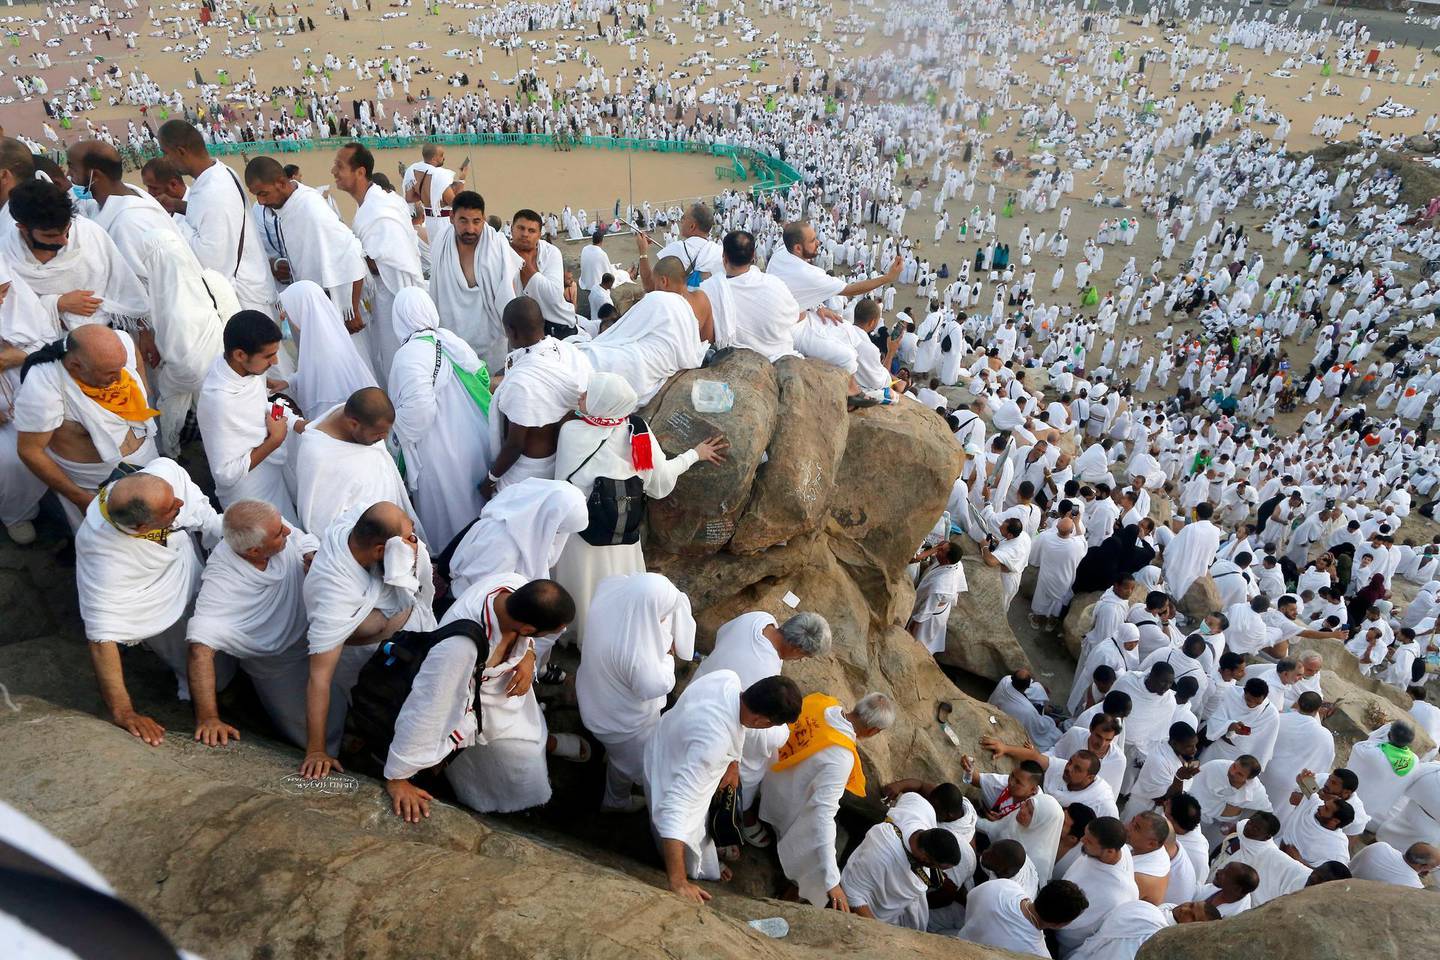 Muslim pilgrims make their way down on a rocky hill known as Mountain of Mercy, on the Plain of Arafat, during the annual hajj pilgrimage, near the holy city of Mecca, Saudi Arabia, Saturday, Aug. 10, 2019. More than 2 million pilgrims were gathered to perform initial rites of the hajj, an Islamic pilgrimage that takes the faithful along a path traversed by the Prophet Muhammad some 1,400 years ago. (AP Photo/Amr Nabil)